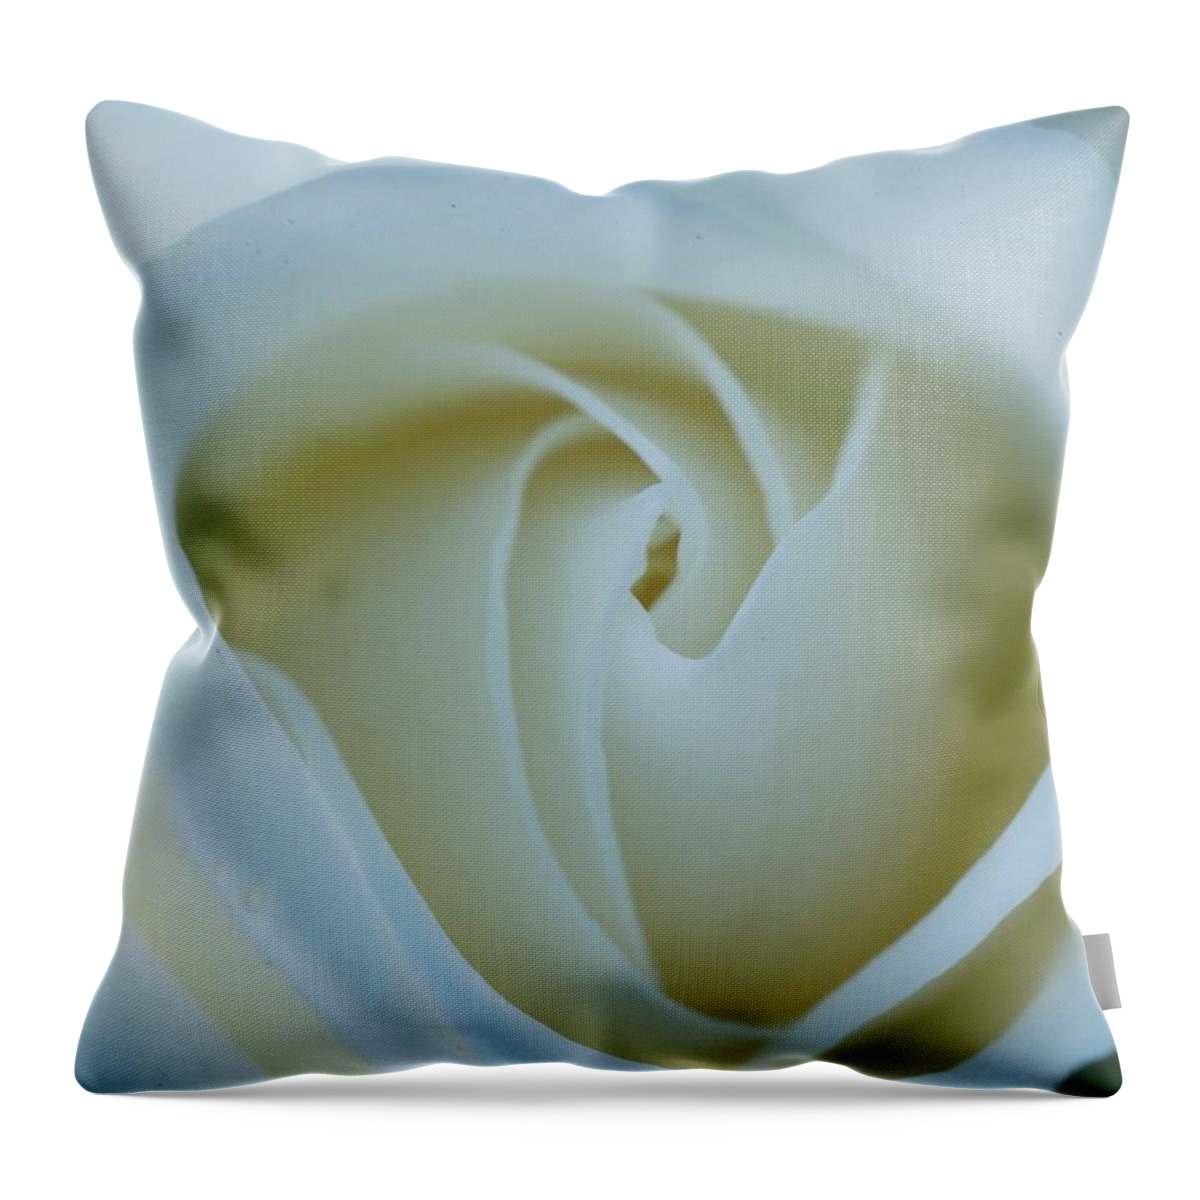 White Rose Throw Pillow featuring the photograph Rosebud by Denise Benson